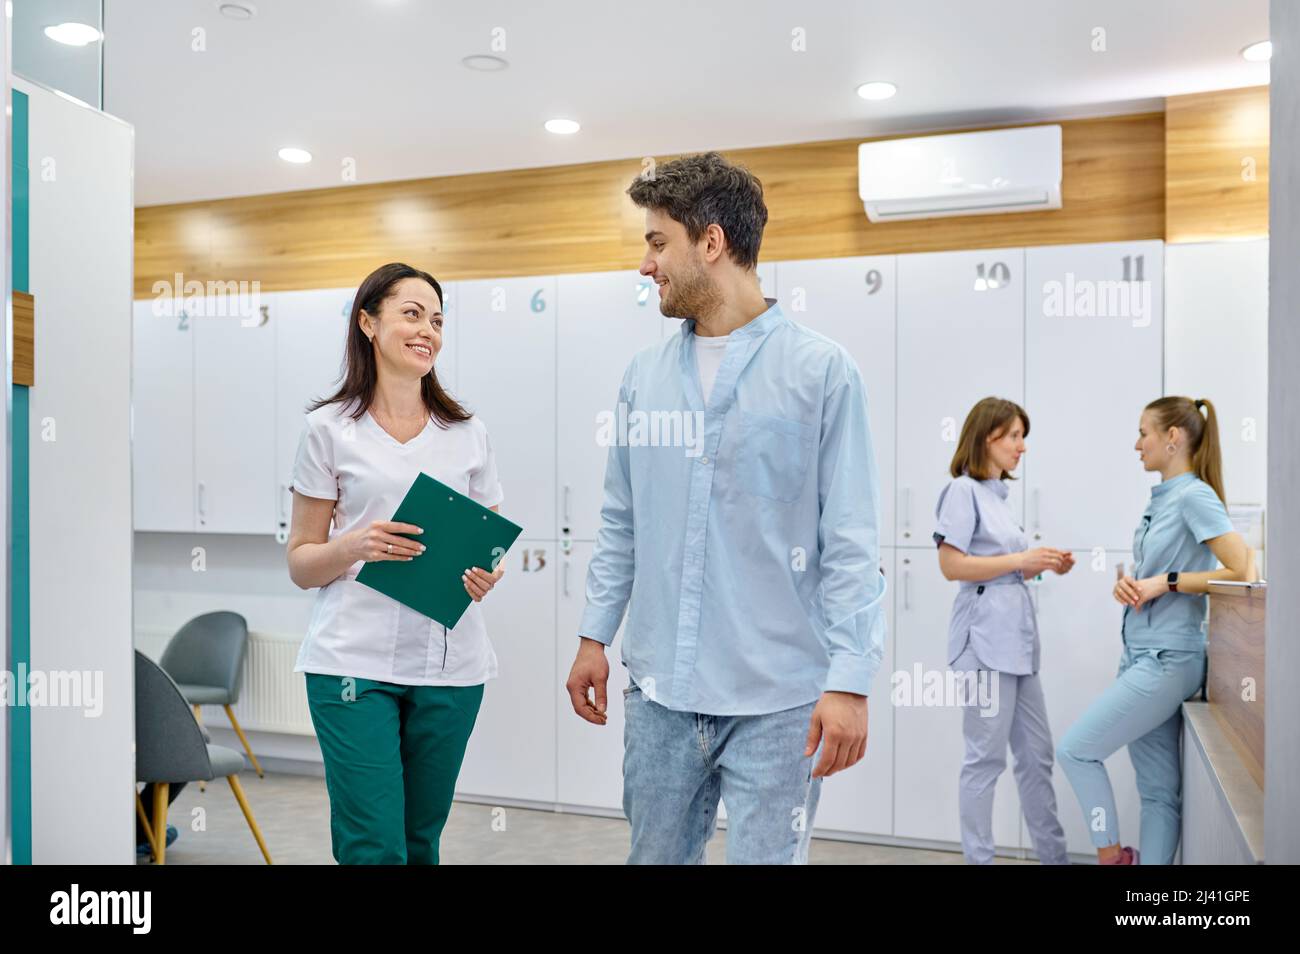 Doctor and patient speaking and walking hallway Stock Photo